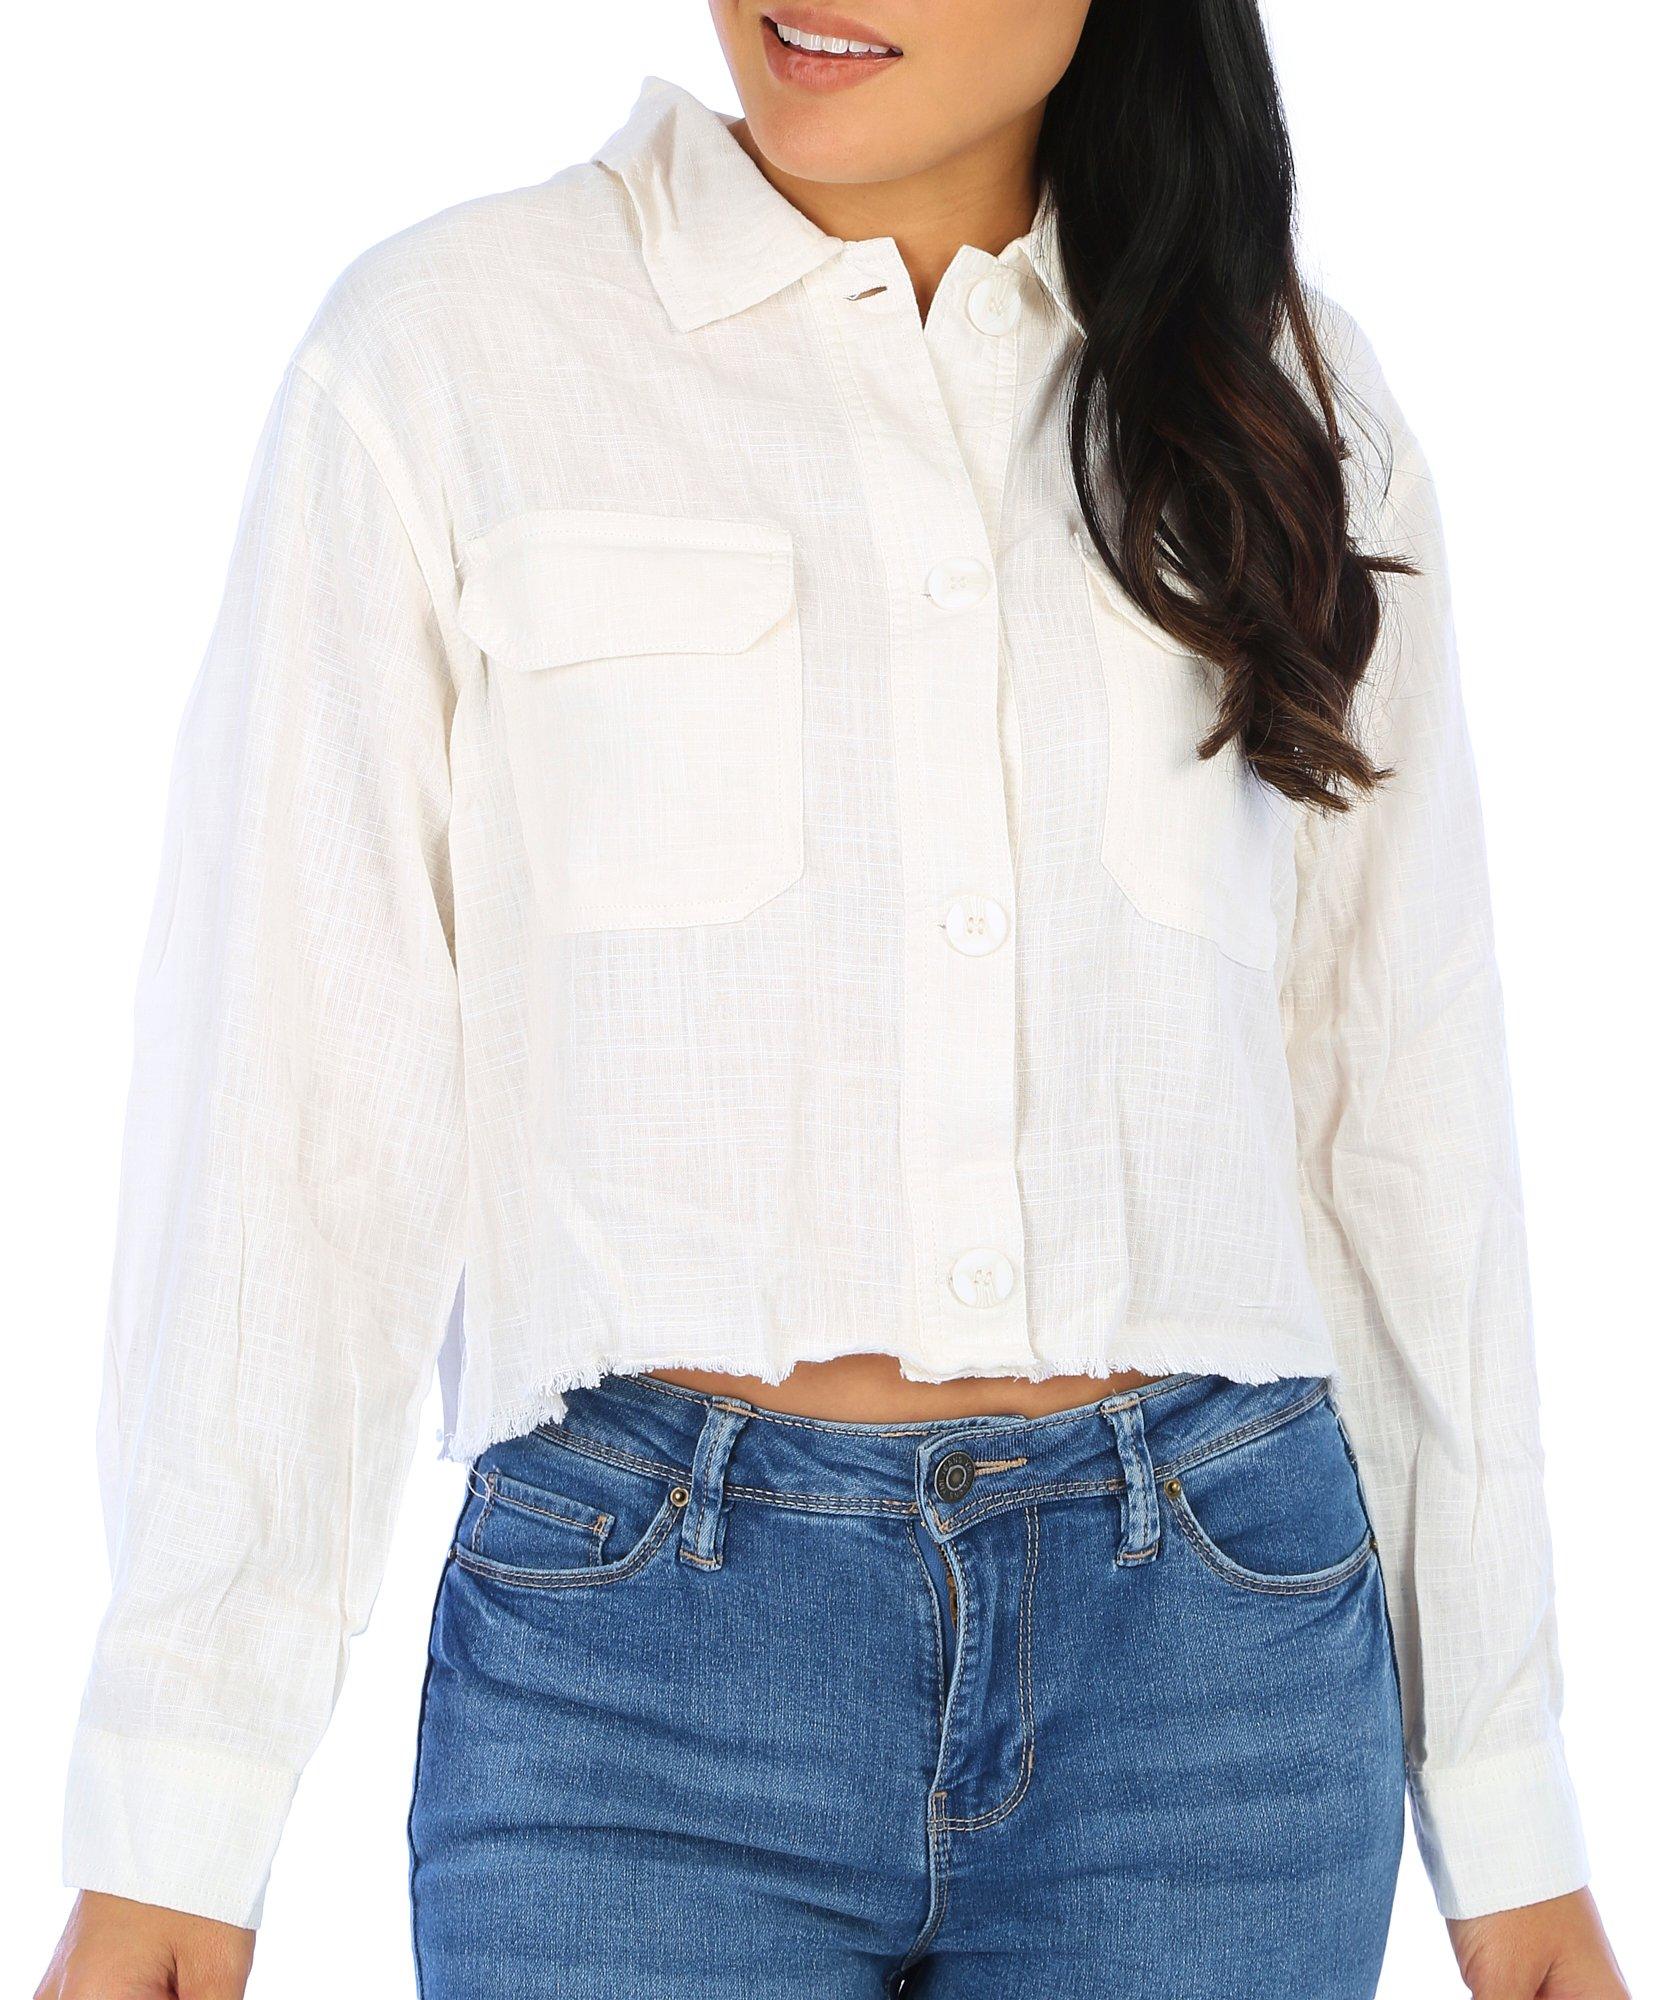 Juniors Solid Button Down Crop Top